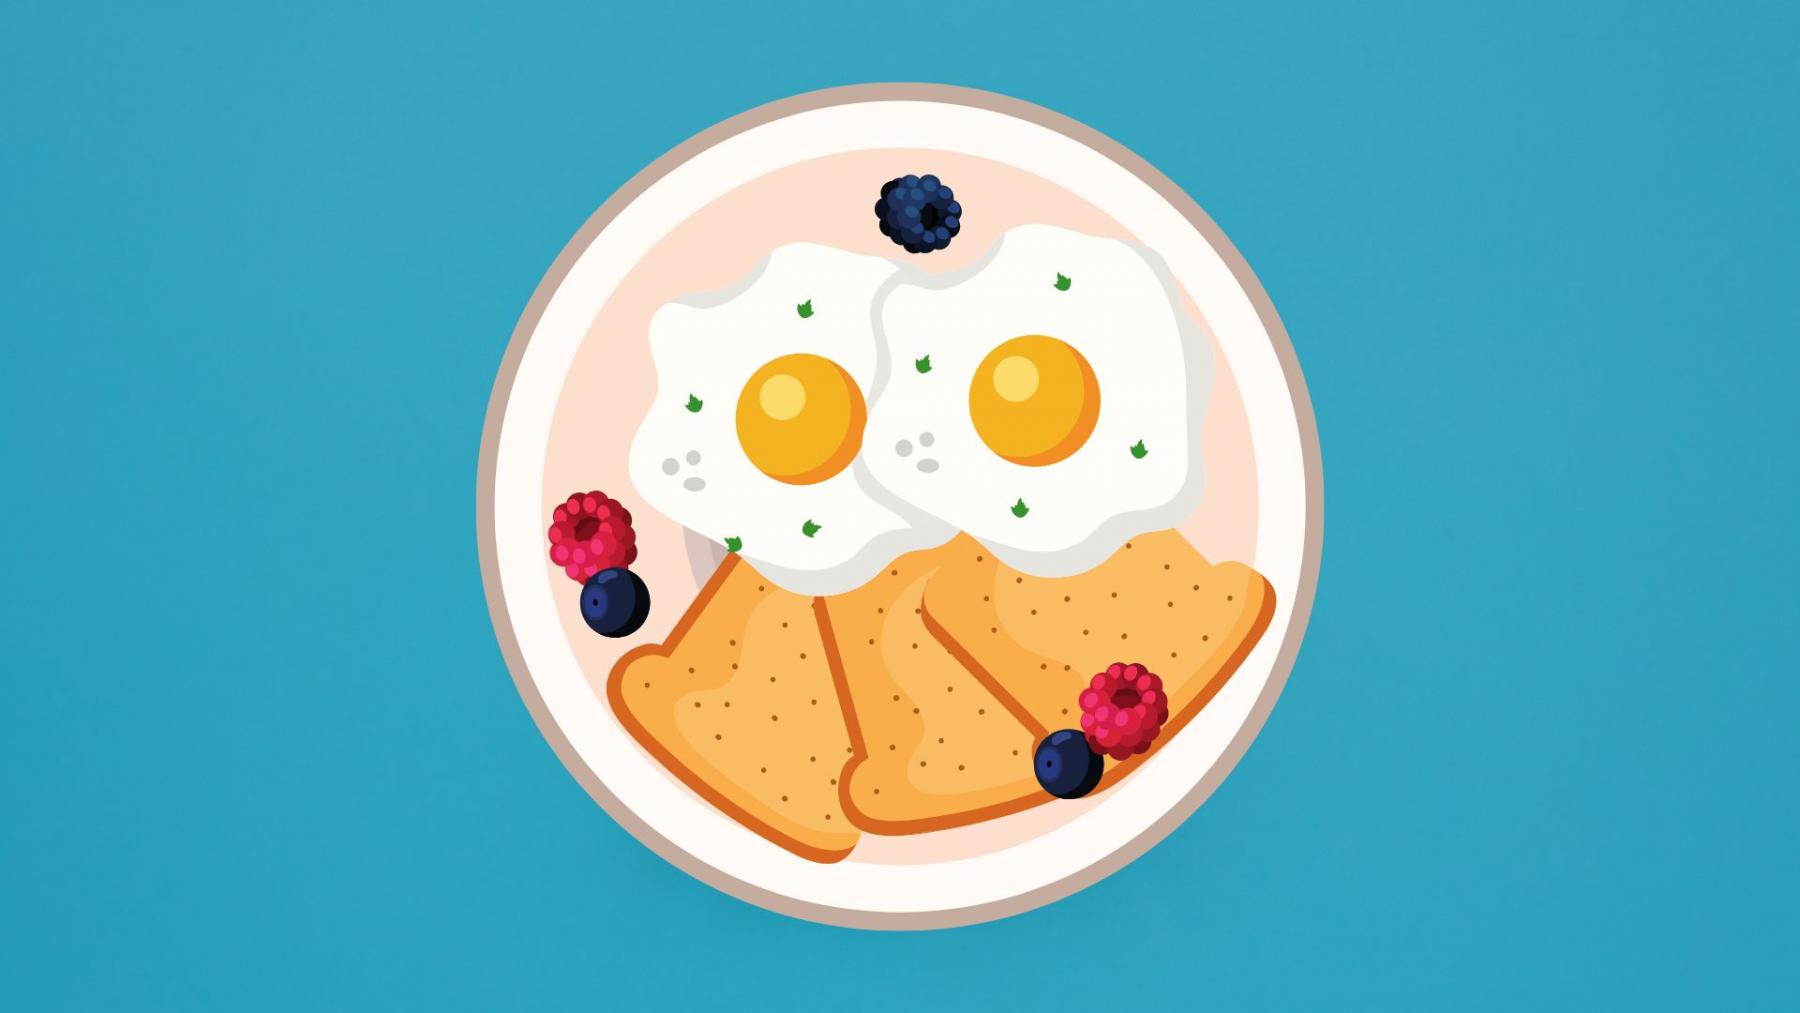 illustrated breakfast plate with bread, eggs, and fruit